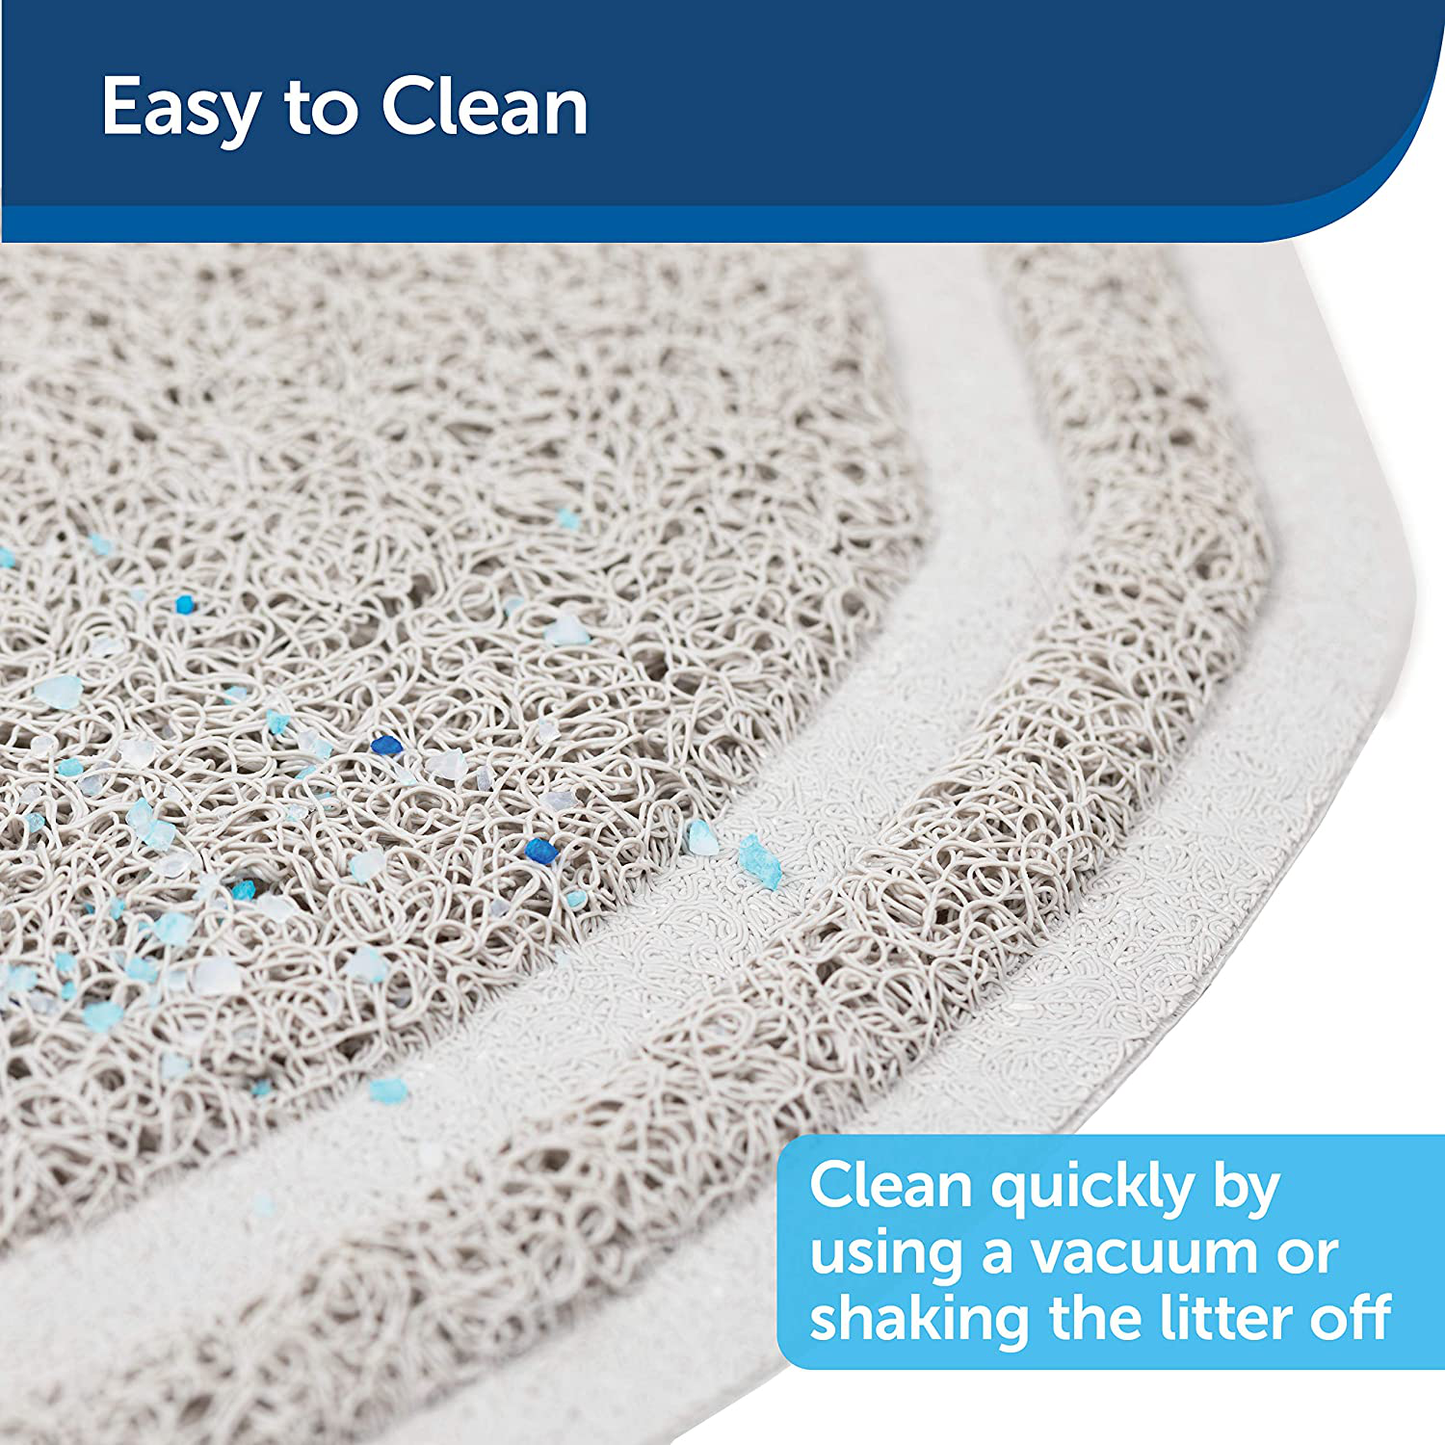 Petsafe Anti-Tracking Litter Mat - Traps Crystal and Clay Clumping Cat Litter - Durable Mesh Material - Easy to Clean Mat - Compatible with All Cat Litter Boxes - Small Size